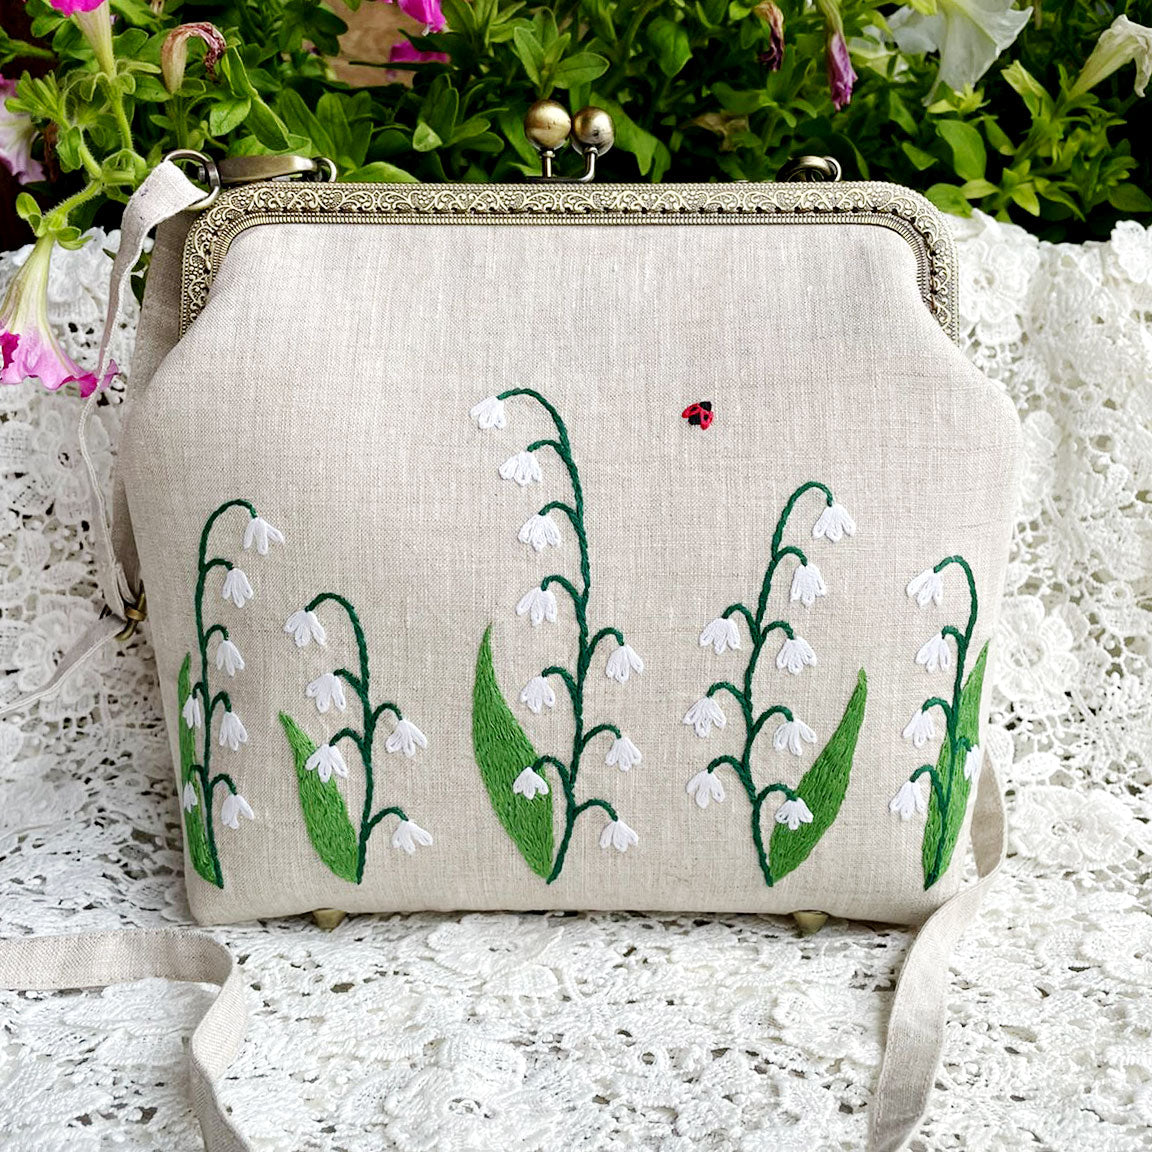 Embroidery Bags with Intricate Designs | Fable England – Fable England US